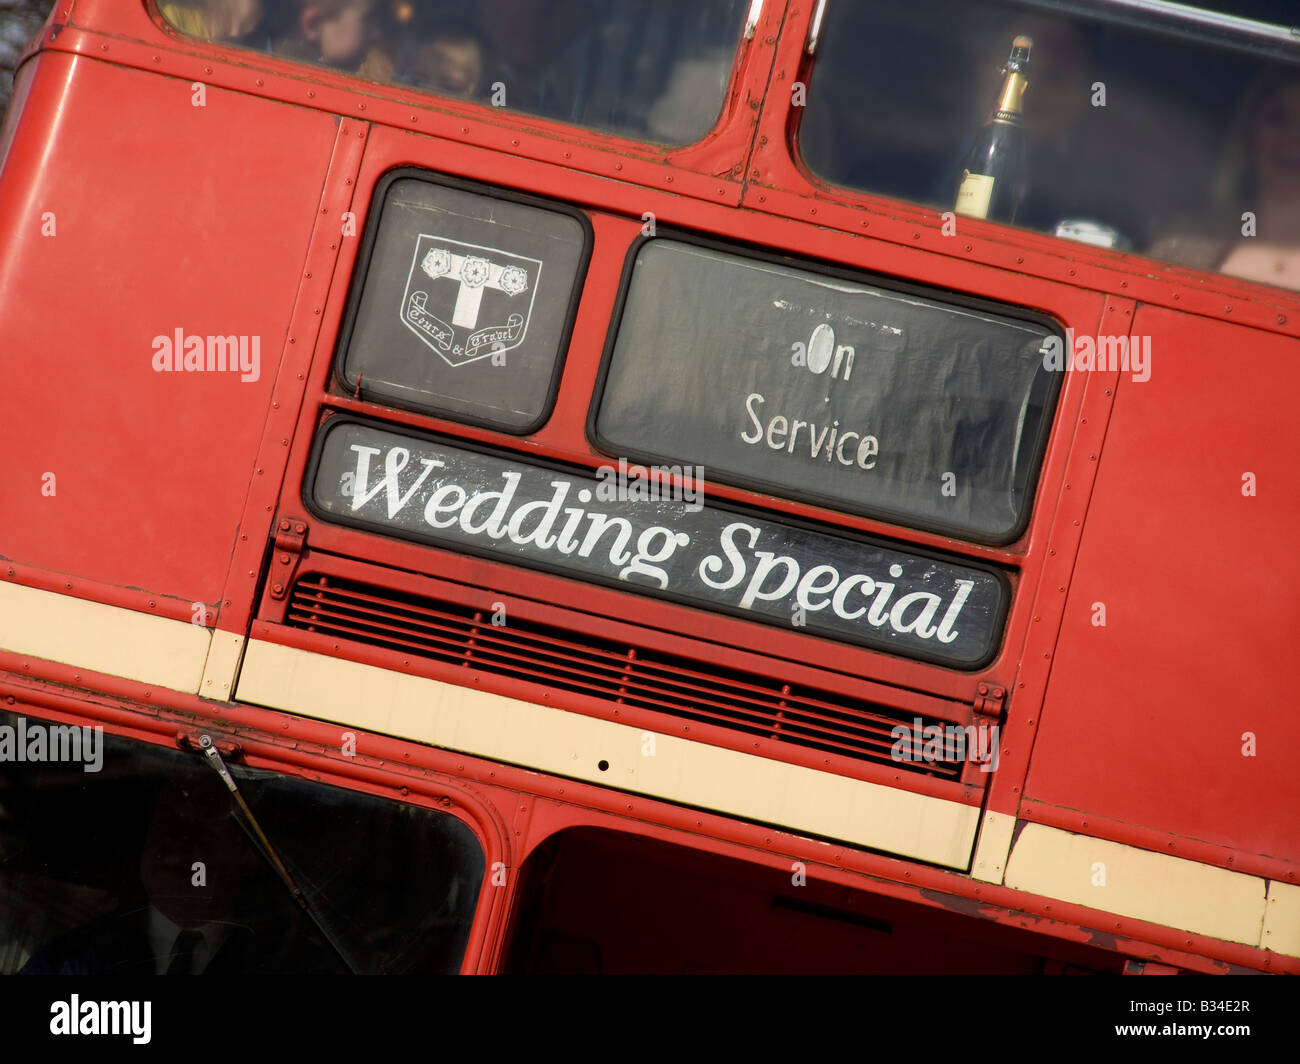 Wedding Special sign on front of red double decker bus Stock Photo